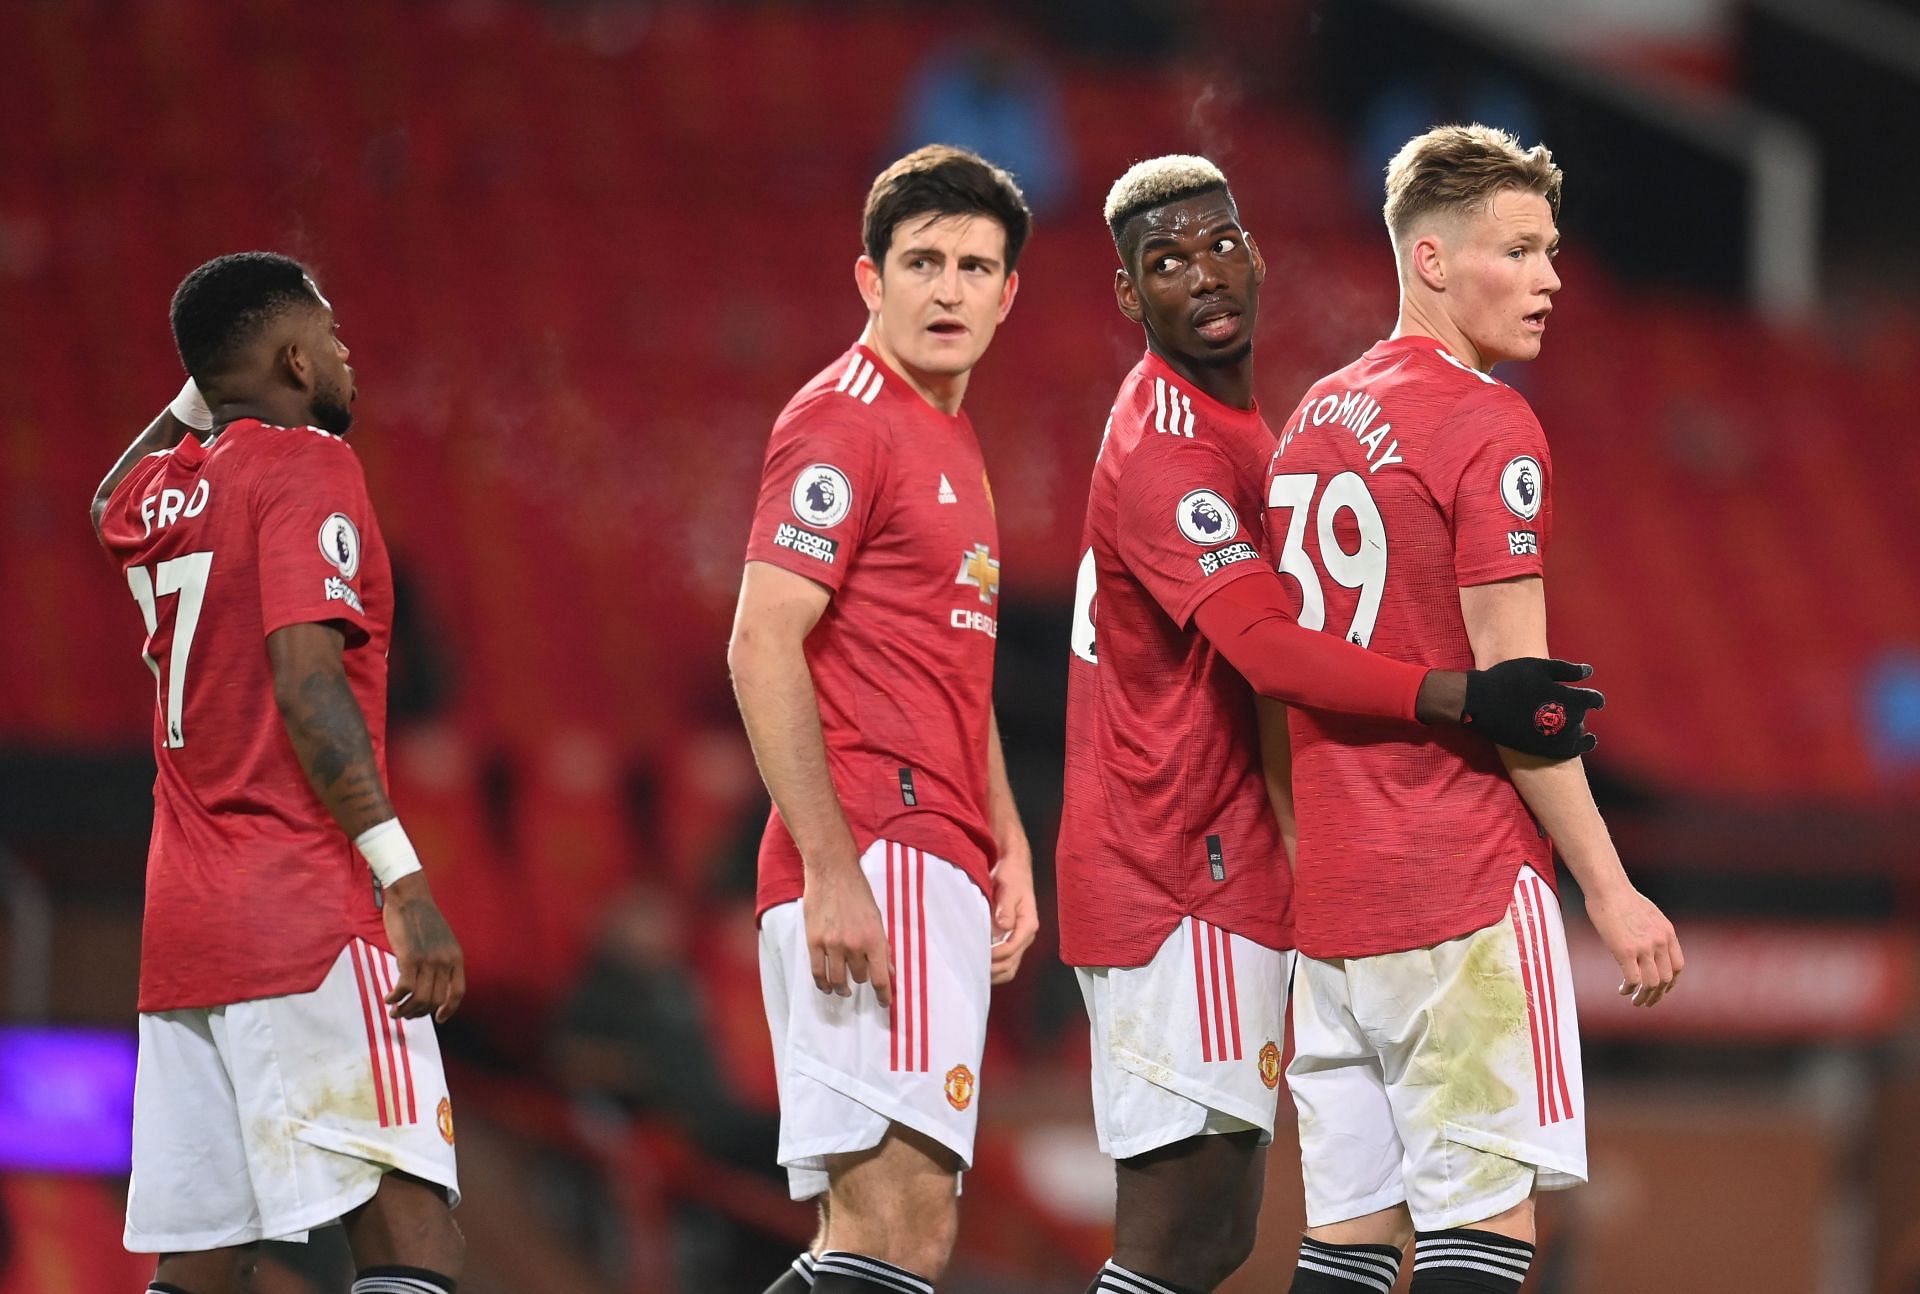 Manchester United have failed to impress in the Premier League this season